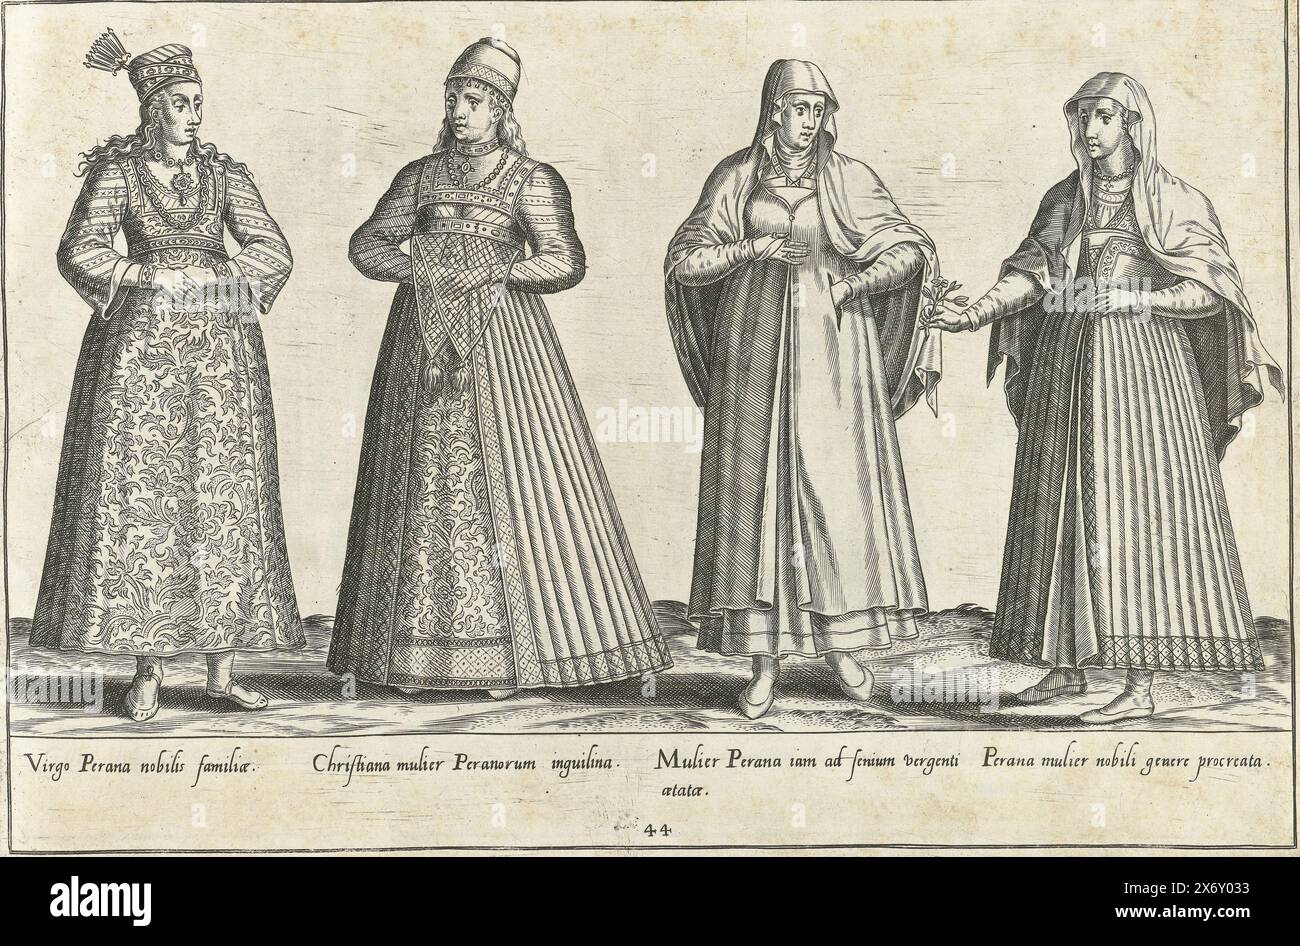 Four Persian women, dressed according to the fashion of ca. 1580, Print from the book 'Omnium pene Europae, Asiae, Aphricae atque Americae gentium habitus...', 1581. The print is part of an album., print maker: Abraham de Bruyn, publisher: Abraham de Bruyn, in or before 1581, paper, engraving, height c. 265 mm × width c. 360 mm Stock Photo